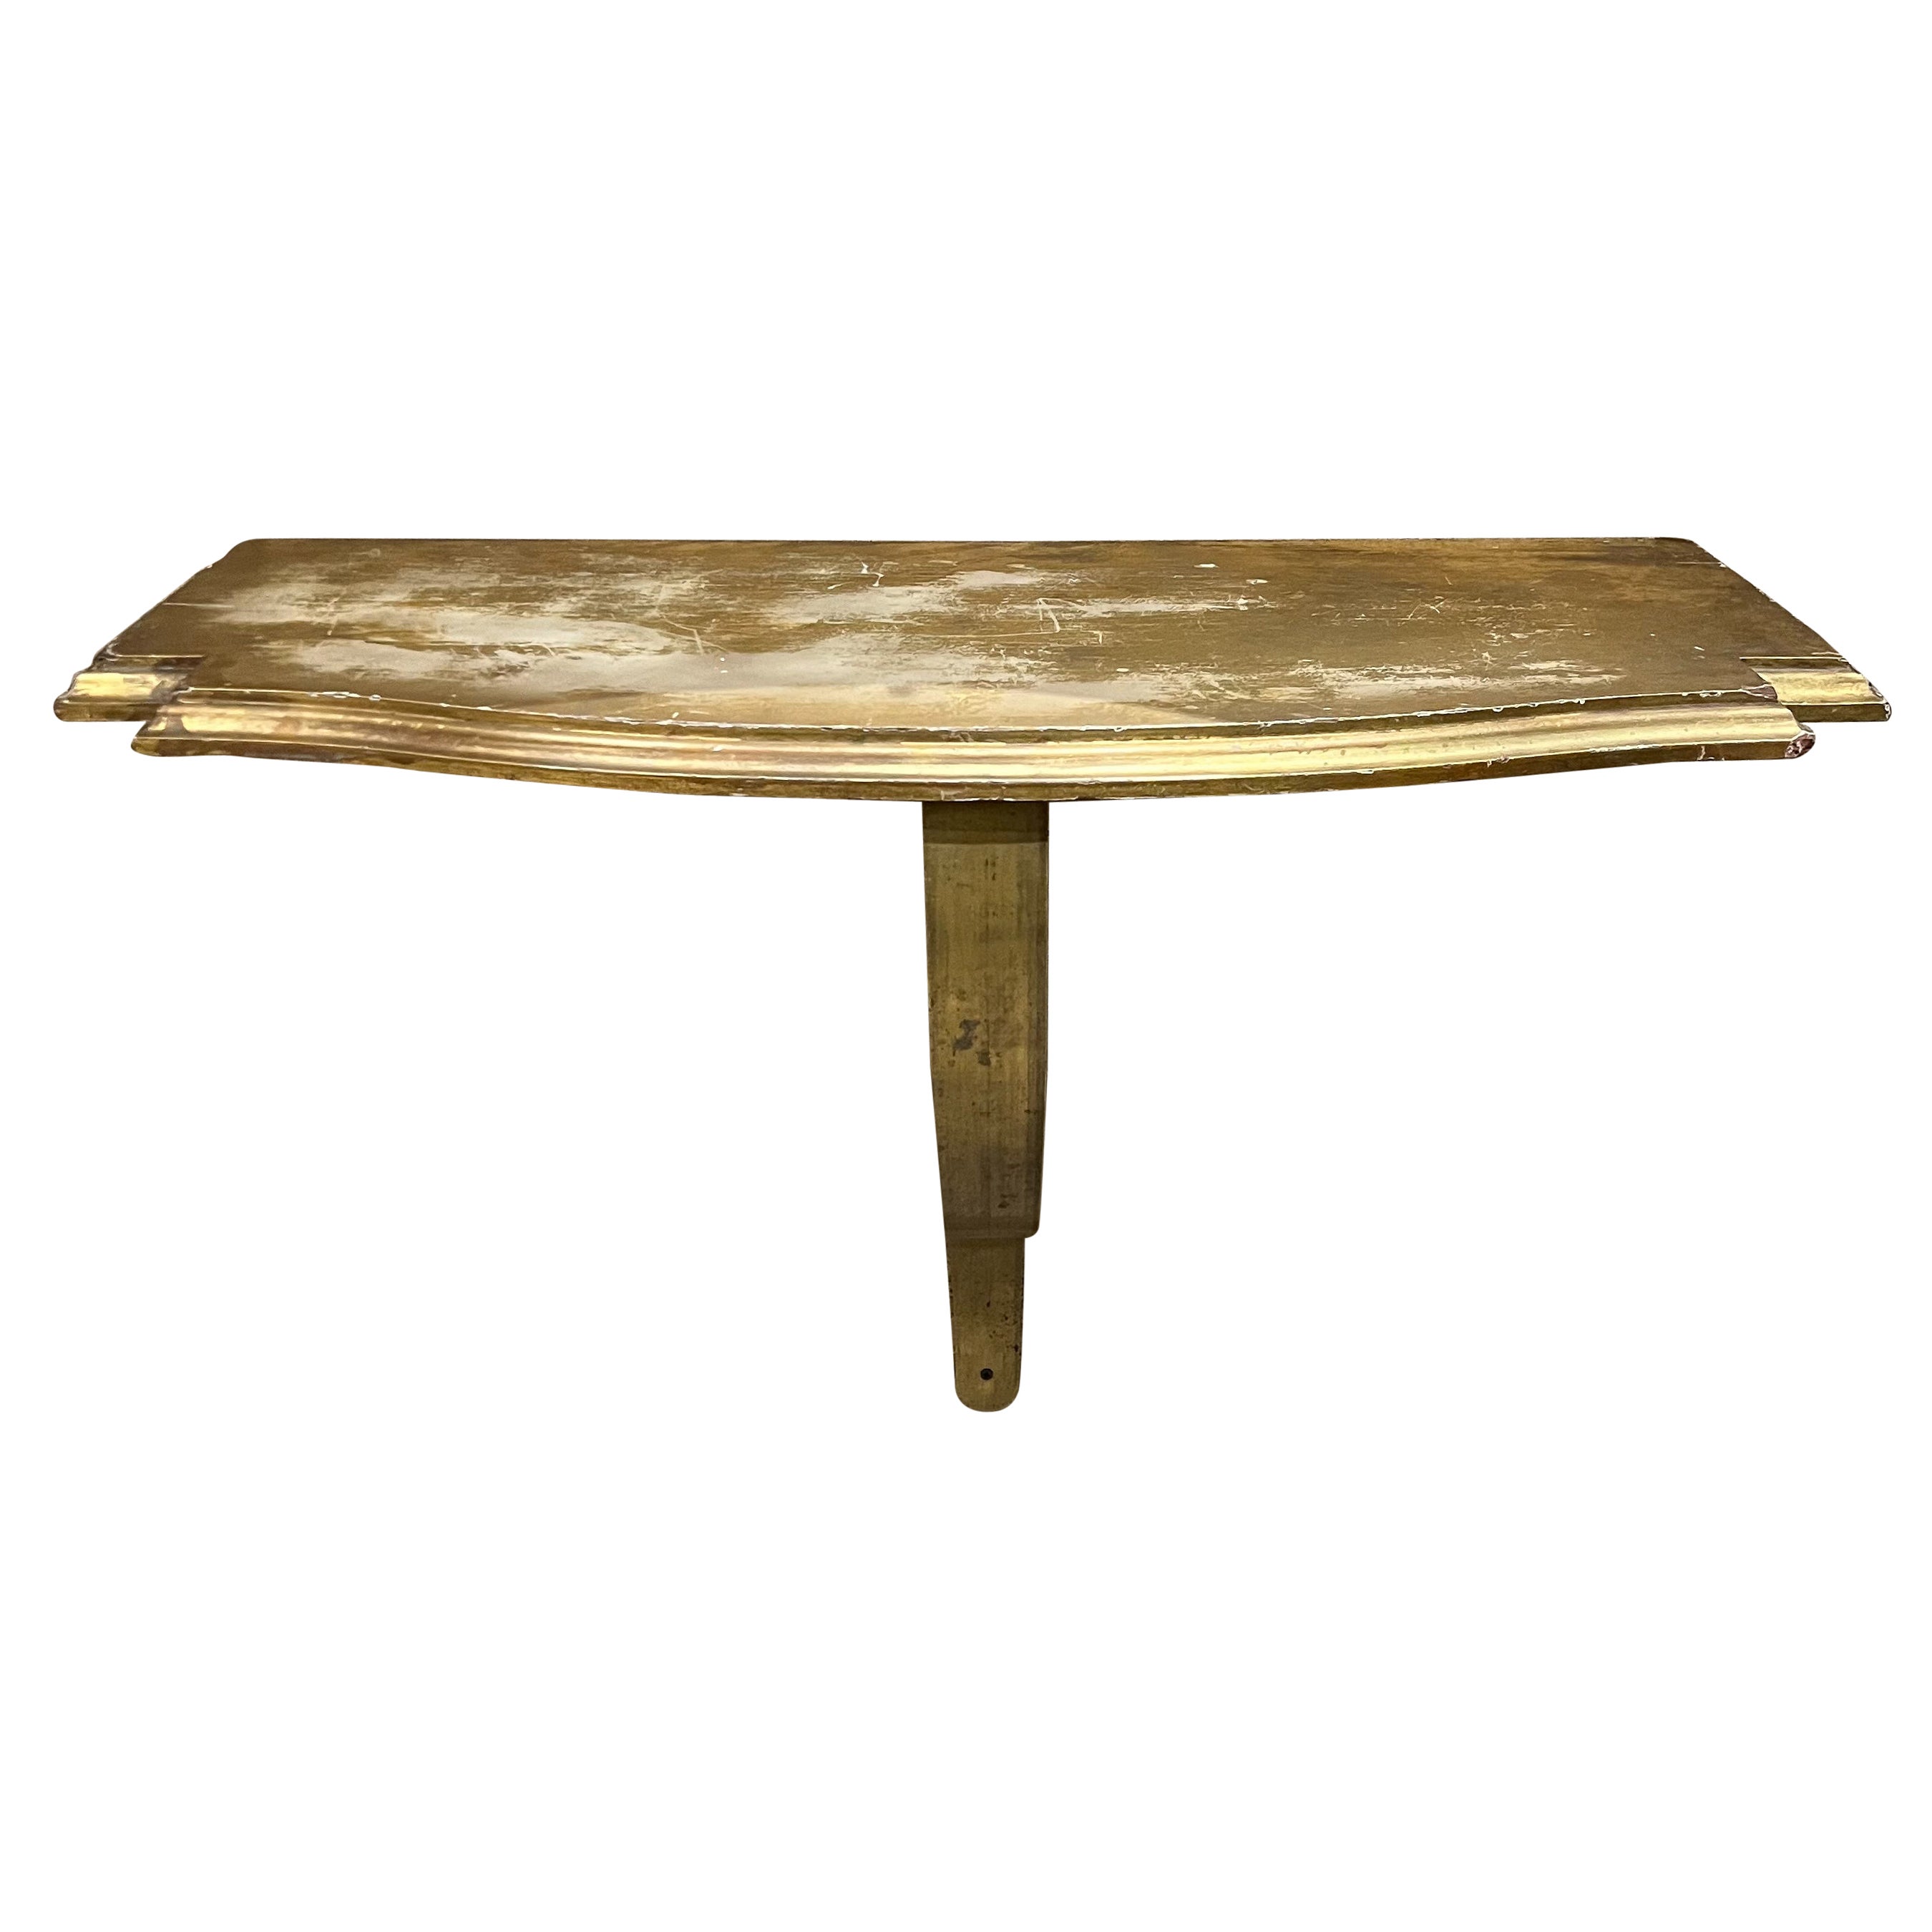 Lovely Giltwood Wall Console Table in Goldleaf with Bronze Base 1950s Italy For Sale